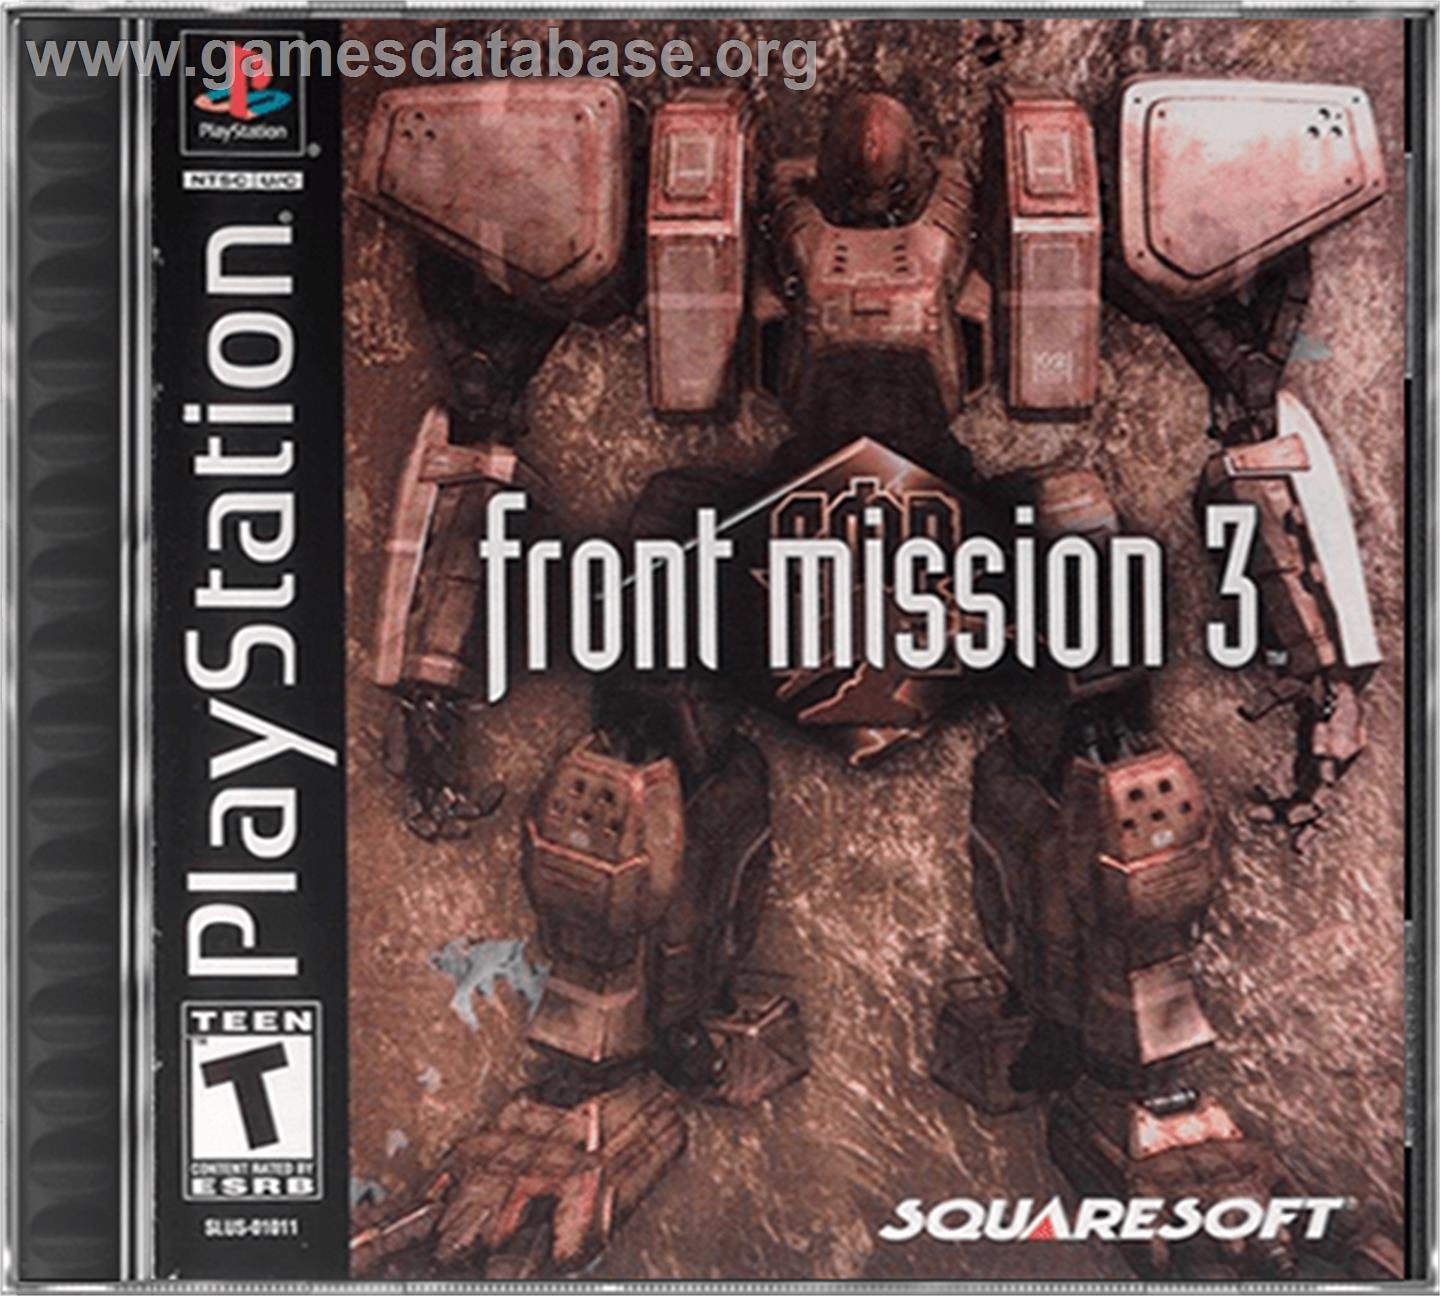 Front Mission 3 - Sony Playstation - Artwork - Box